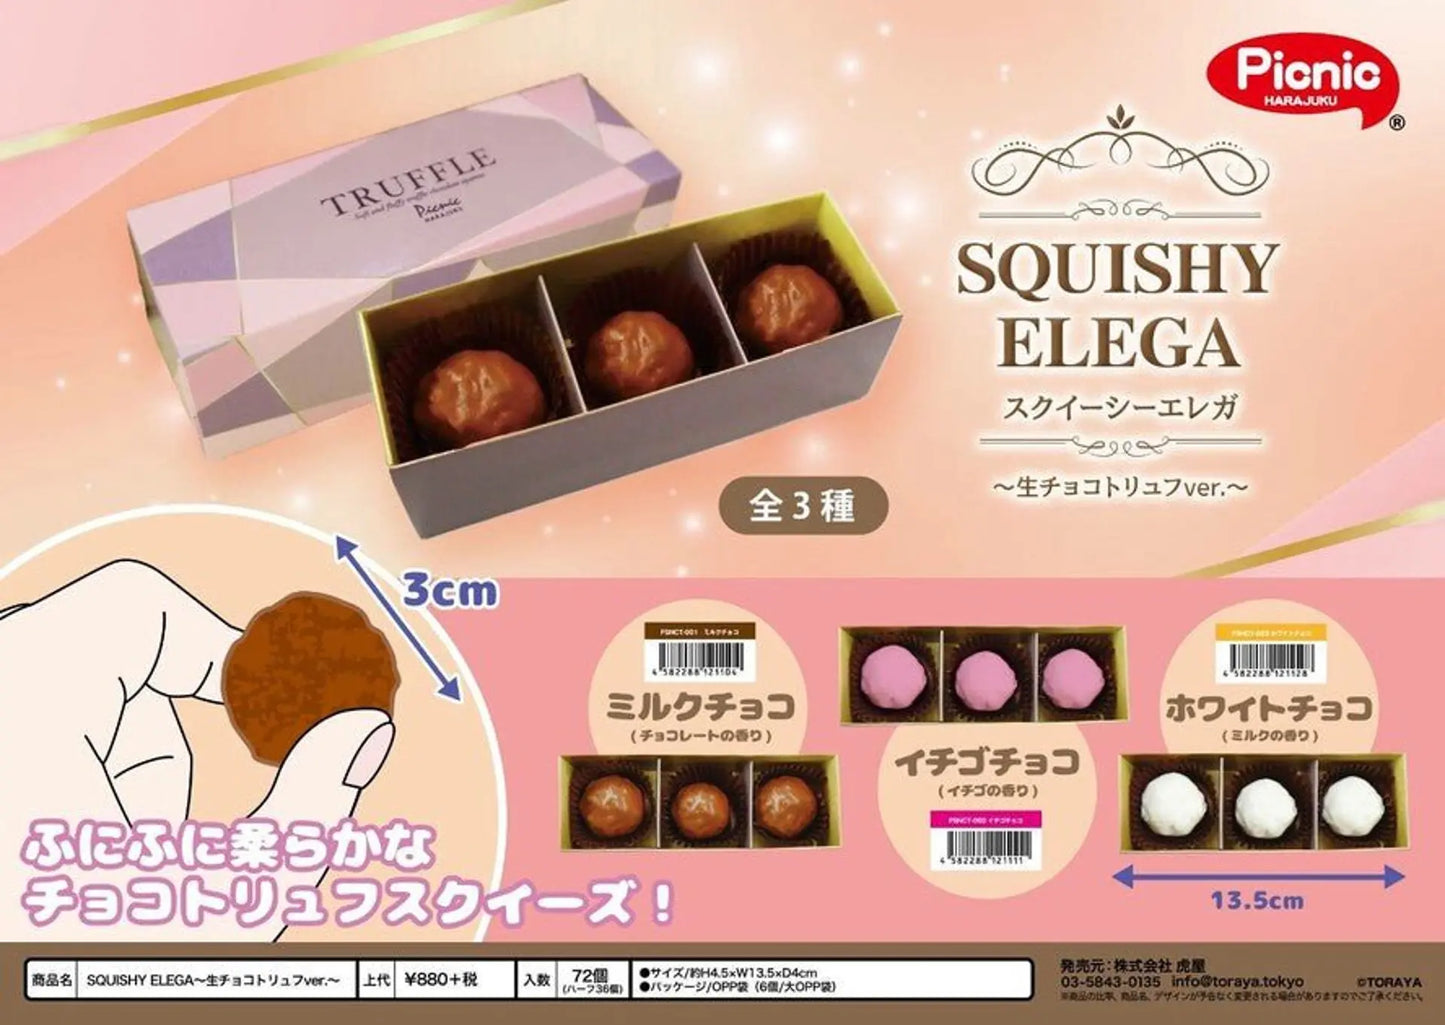 Picnic Soft and Fluffy Truffle Squishies